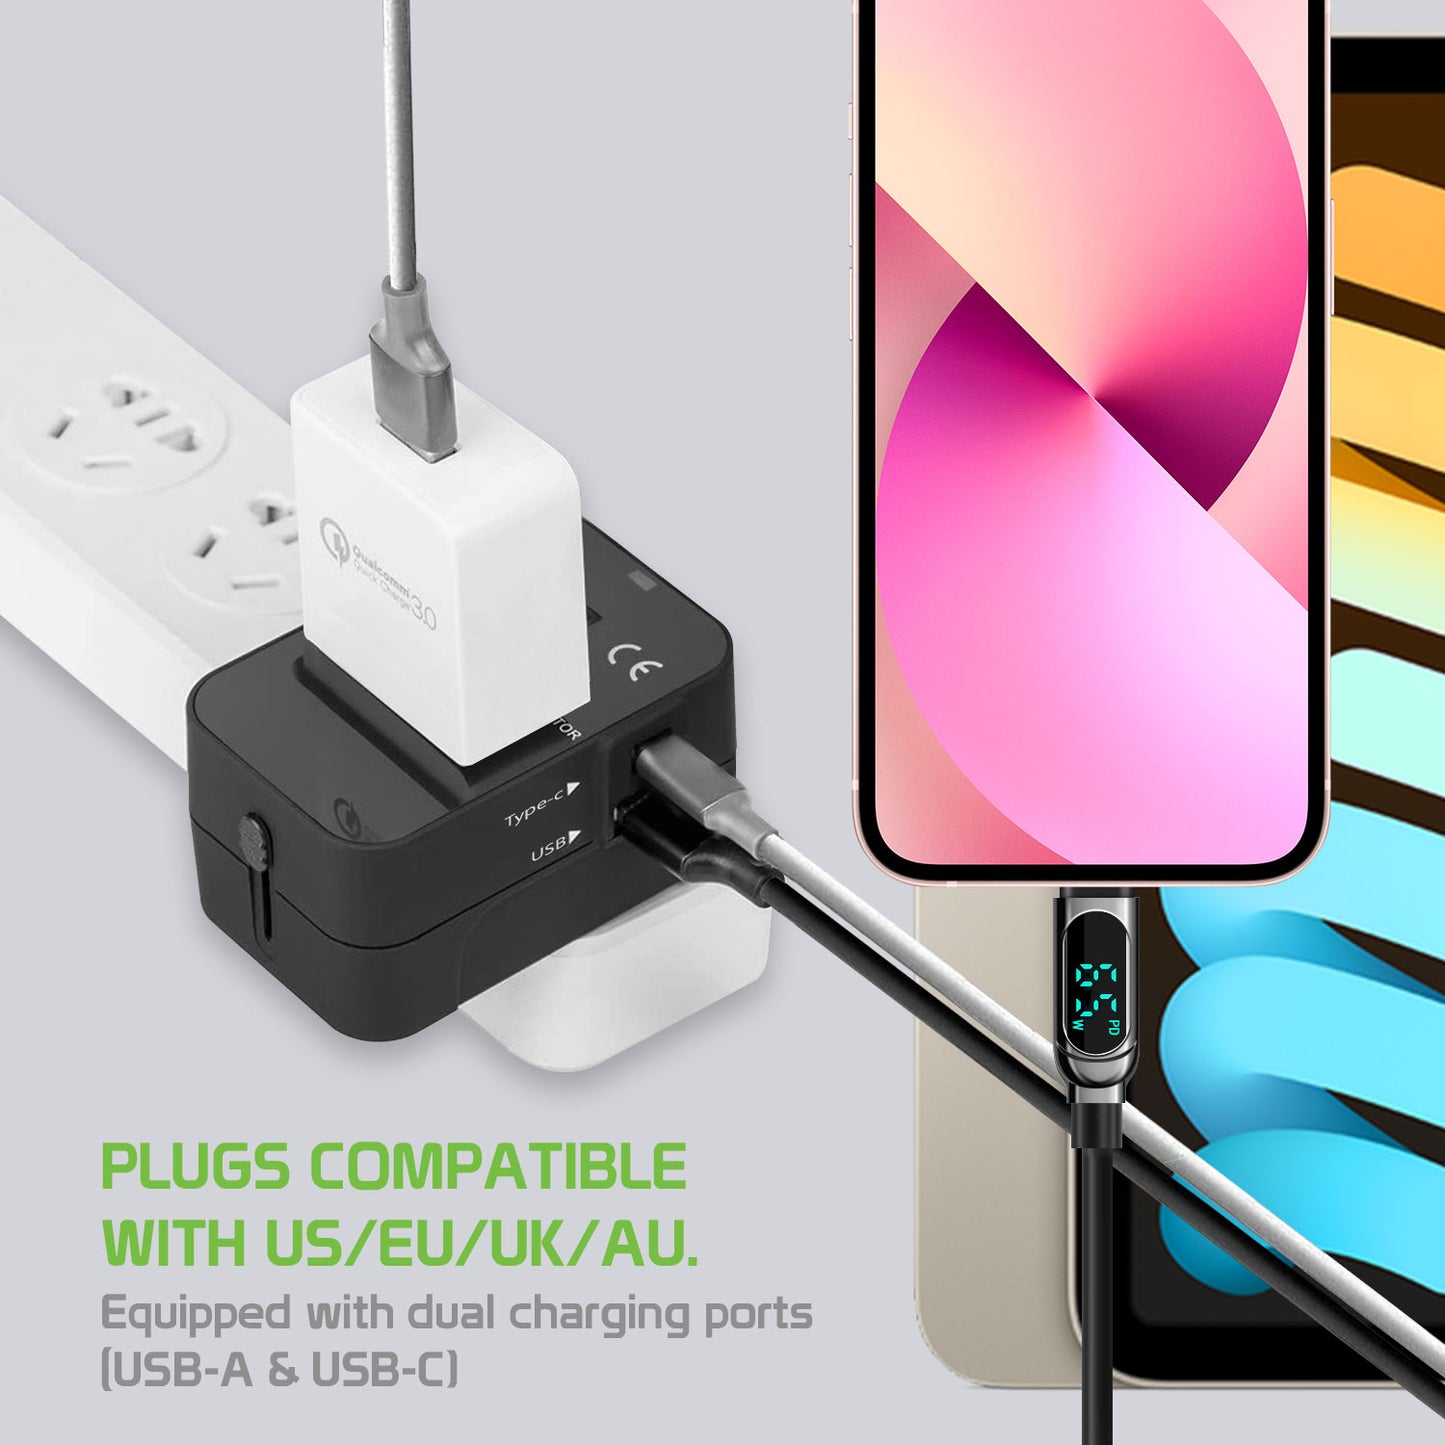 Portable Worldwide Universal Power Adapter Converter All in One International Travel Wall Charger Plug for Wall Plug Input in USA EU UK France Italy Australia India Outlets (With USB-A and USB-C)